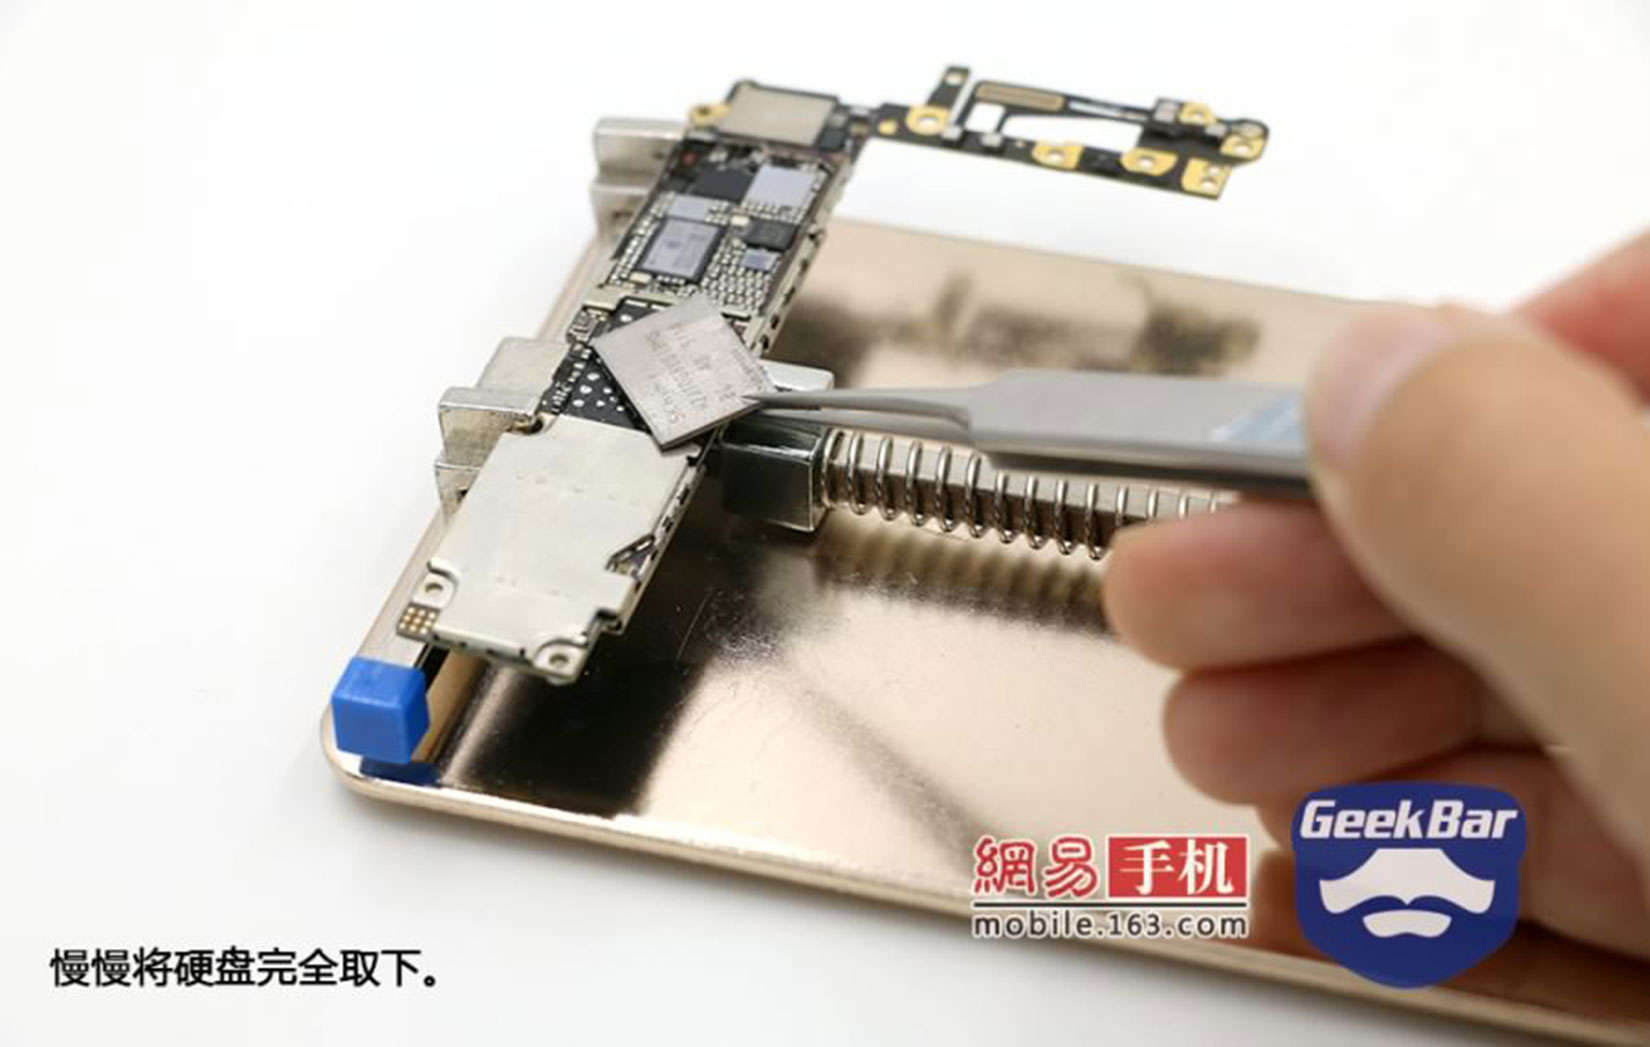 This image shows how one repair service in China replaces the memory chip in an iPhone 6.